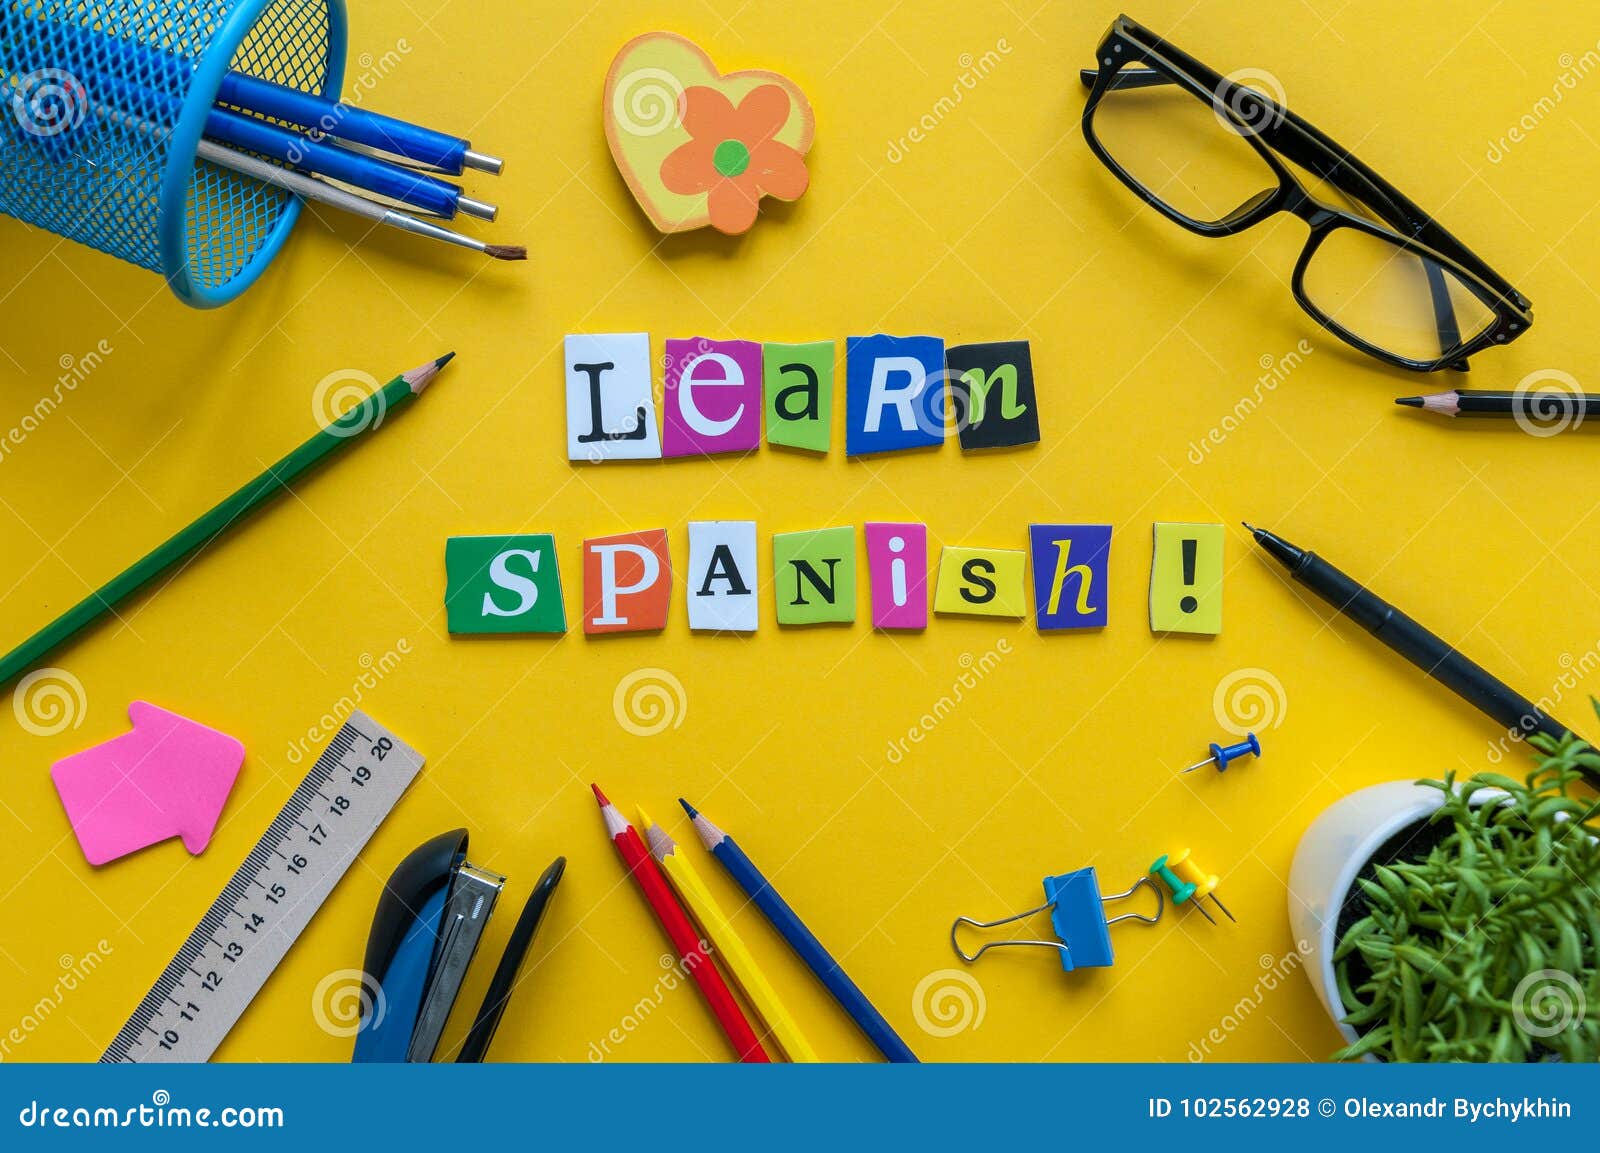 Word Learn Spanish Made With Carved Letters On Yellow Desk With